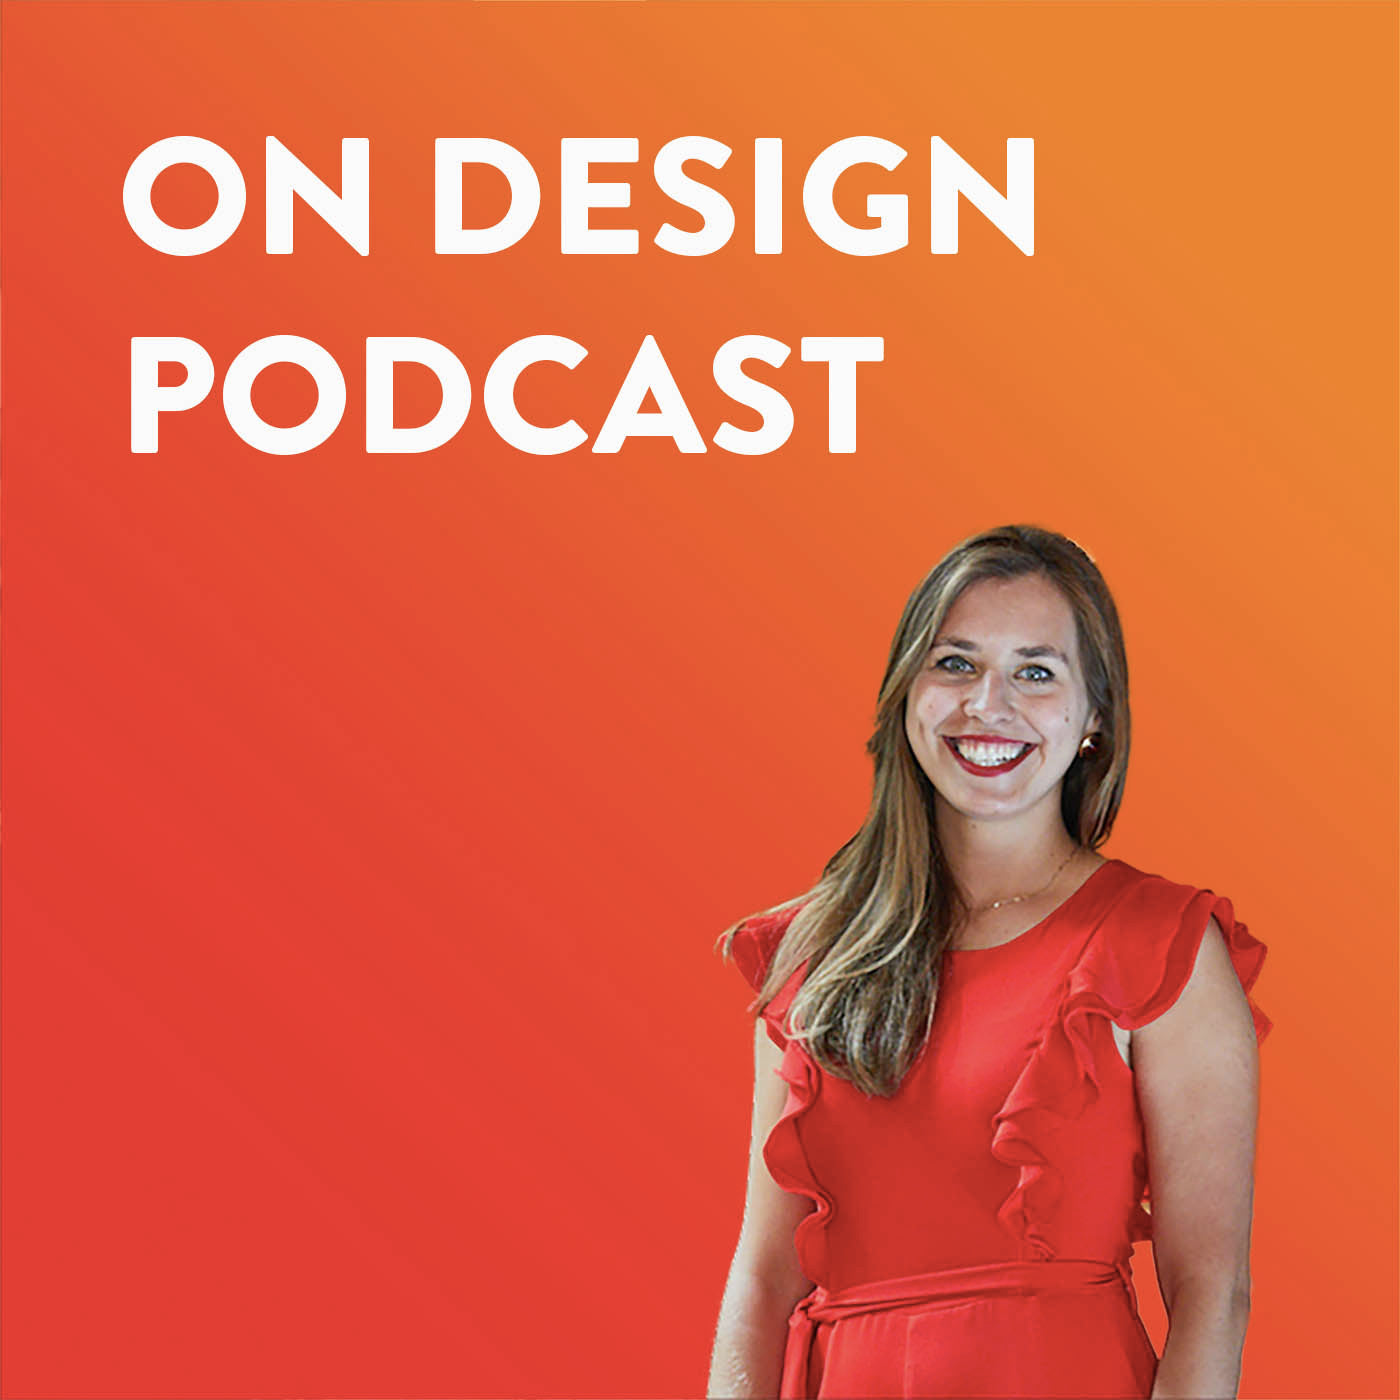 On Design Podcast - Justyna Green - Kirsty Whyte